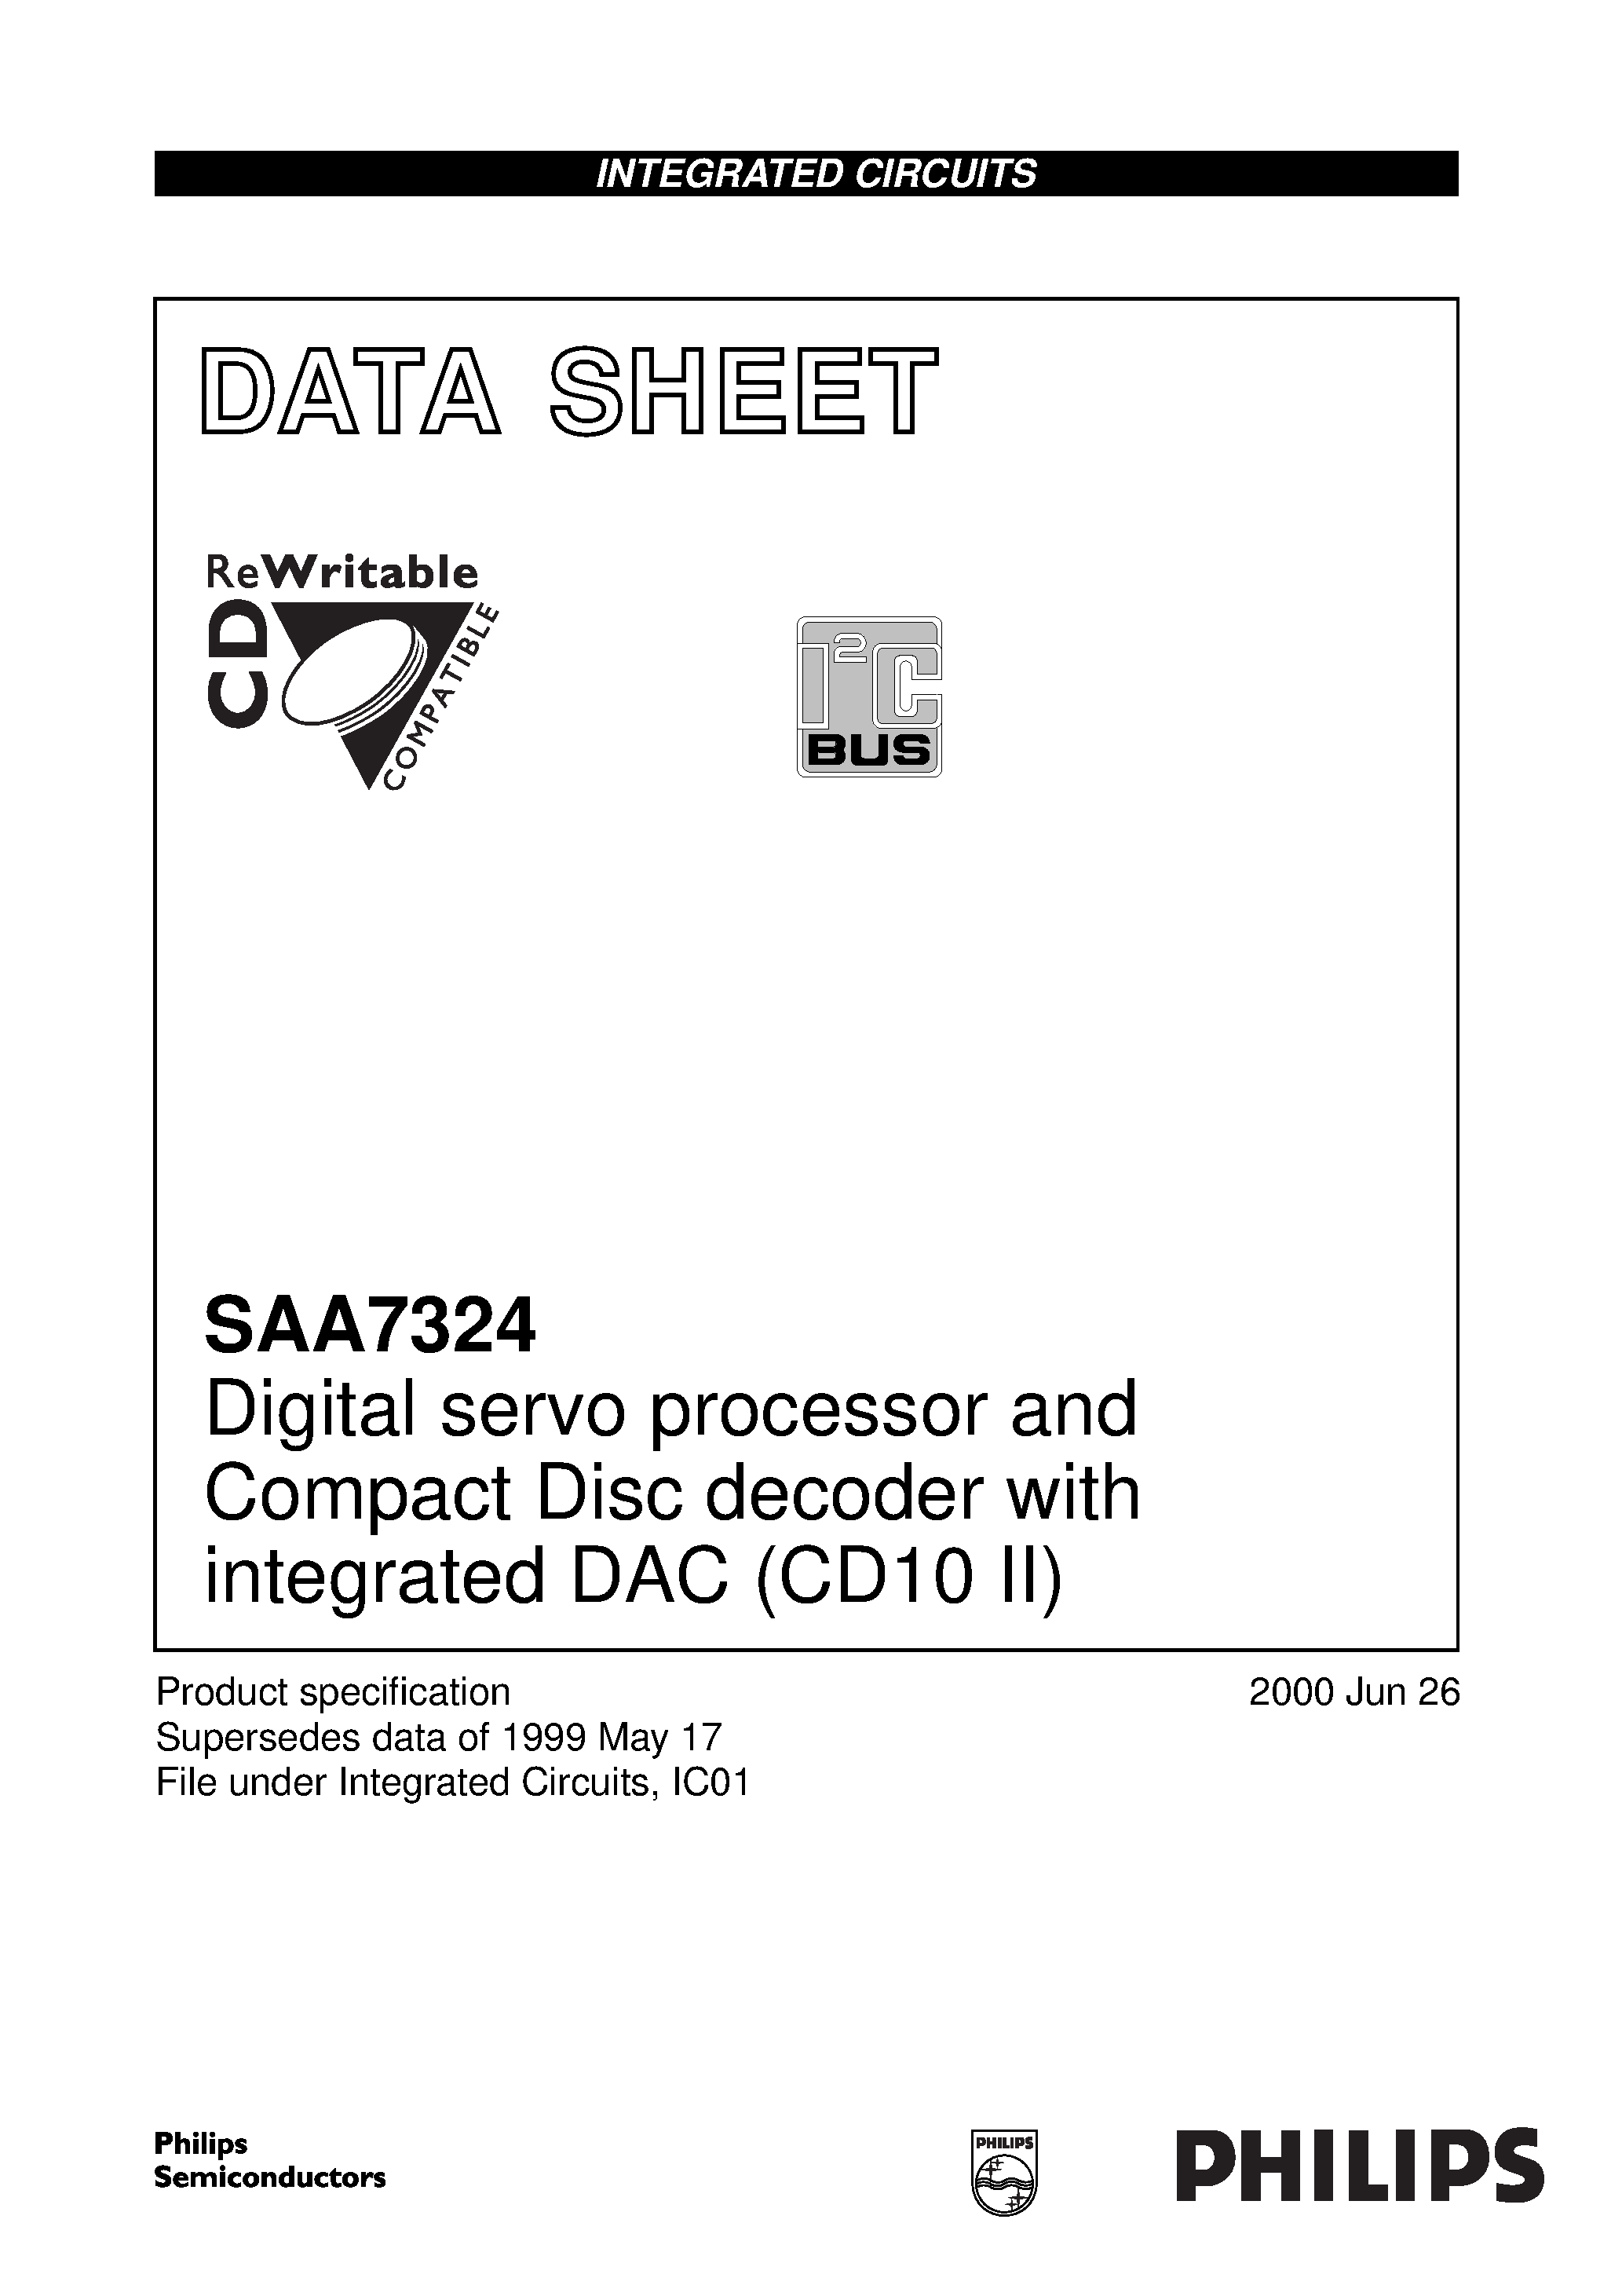 Datasheet SAA7324 - Digital servo processor and Compact Disc decoder with integrated DAC CD10 II page 1